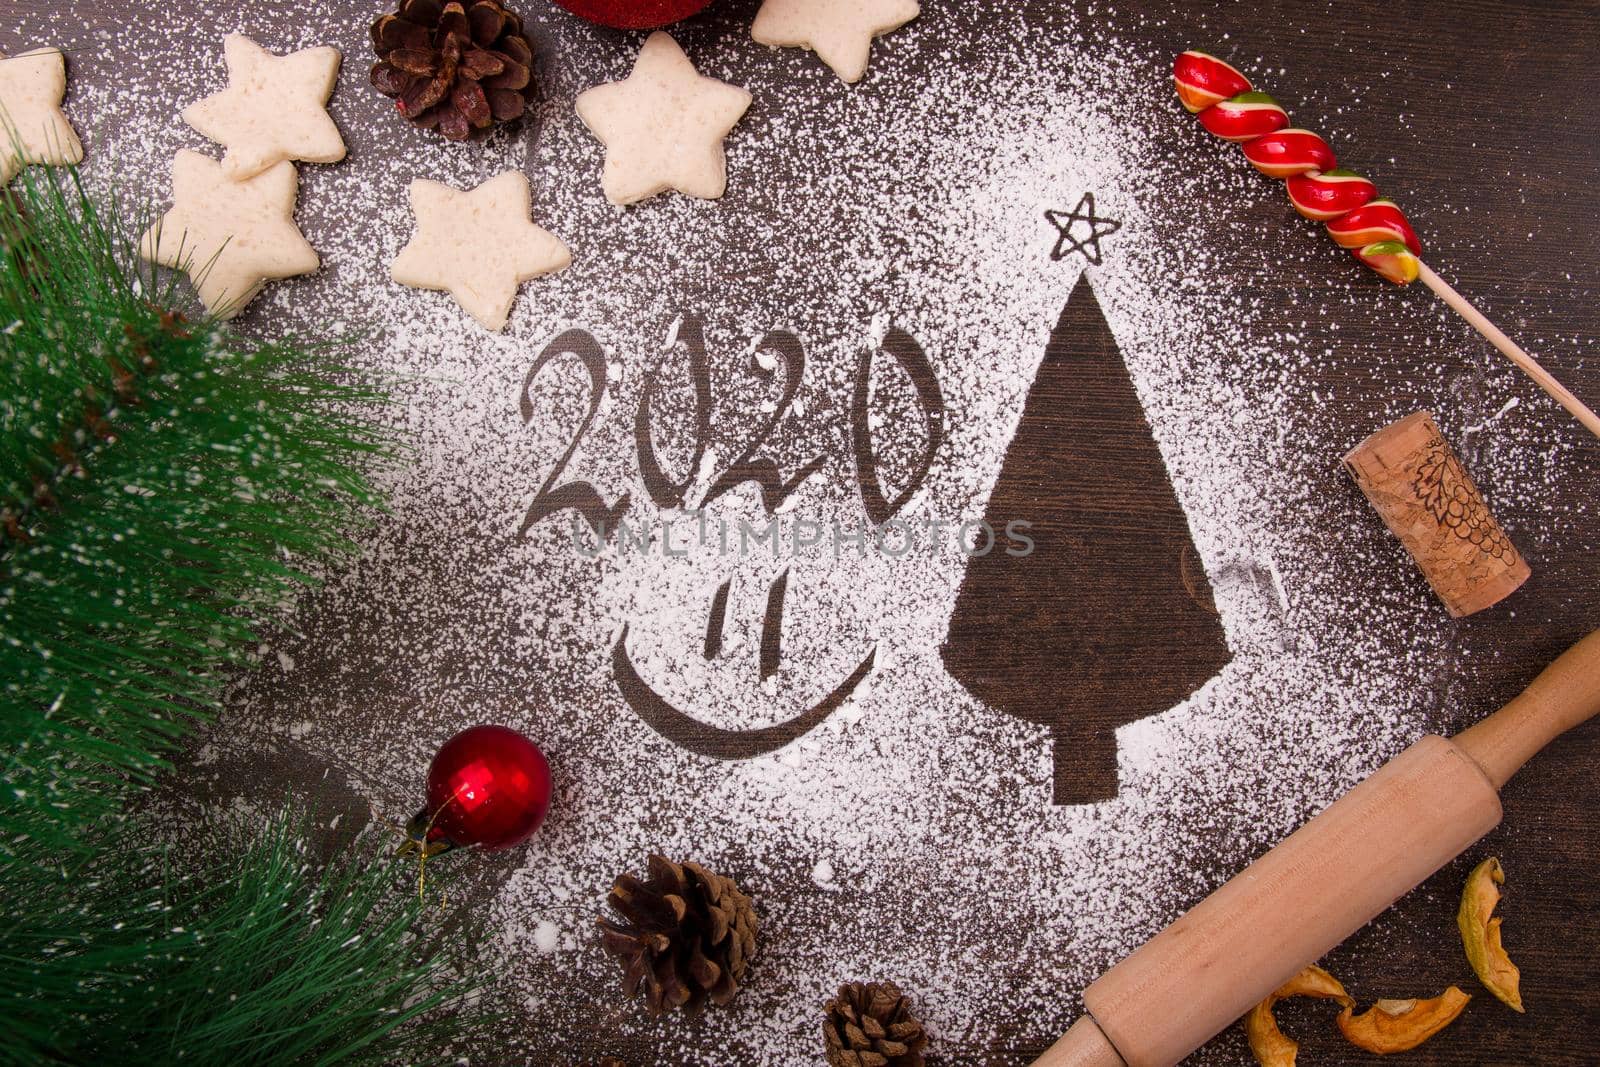 Christmas cookies in the shape of stars, dough for bees, kitchen scoops and rolling pin, top view, silhouette of a Christmas tree made from flour, top view, copy space by natashko